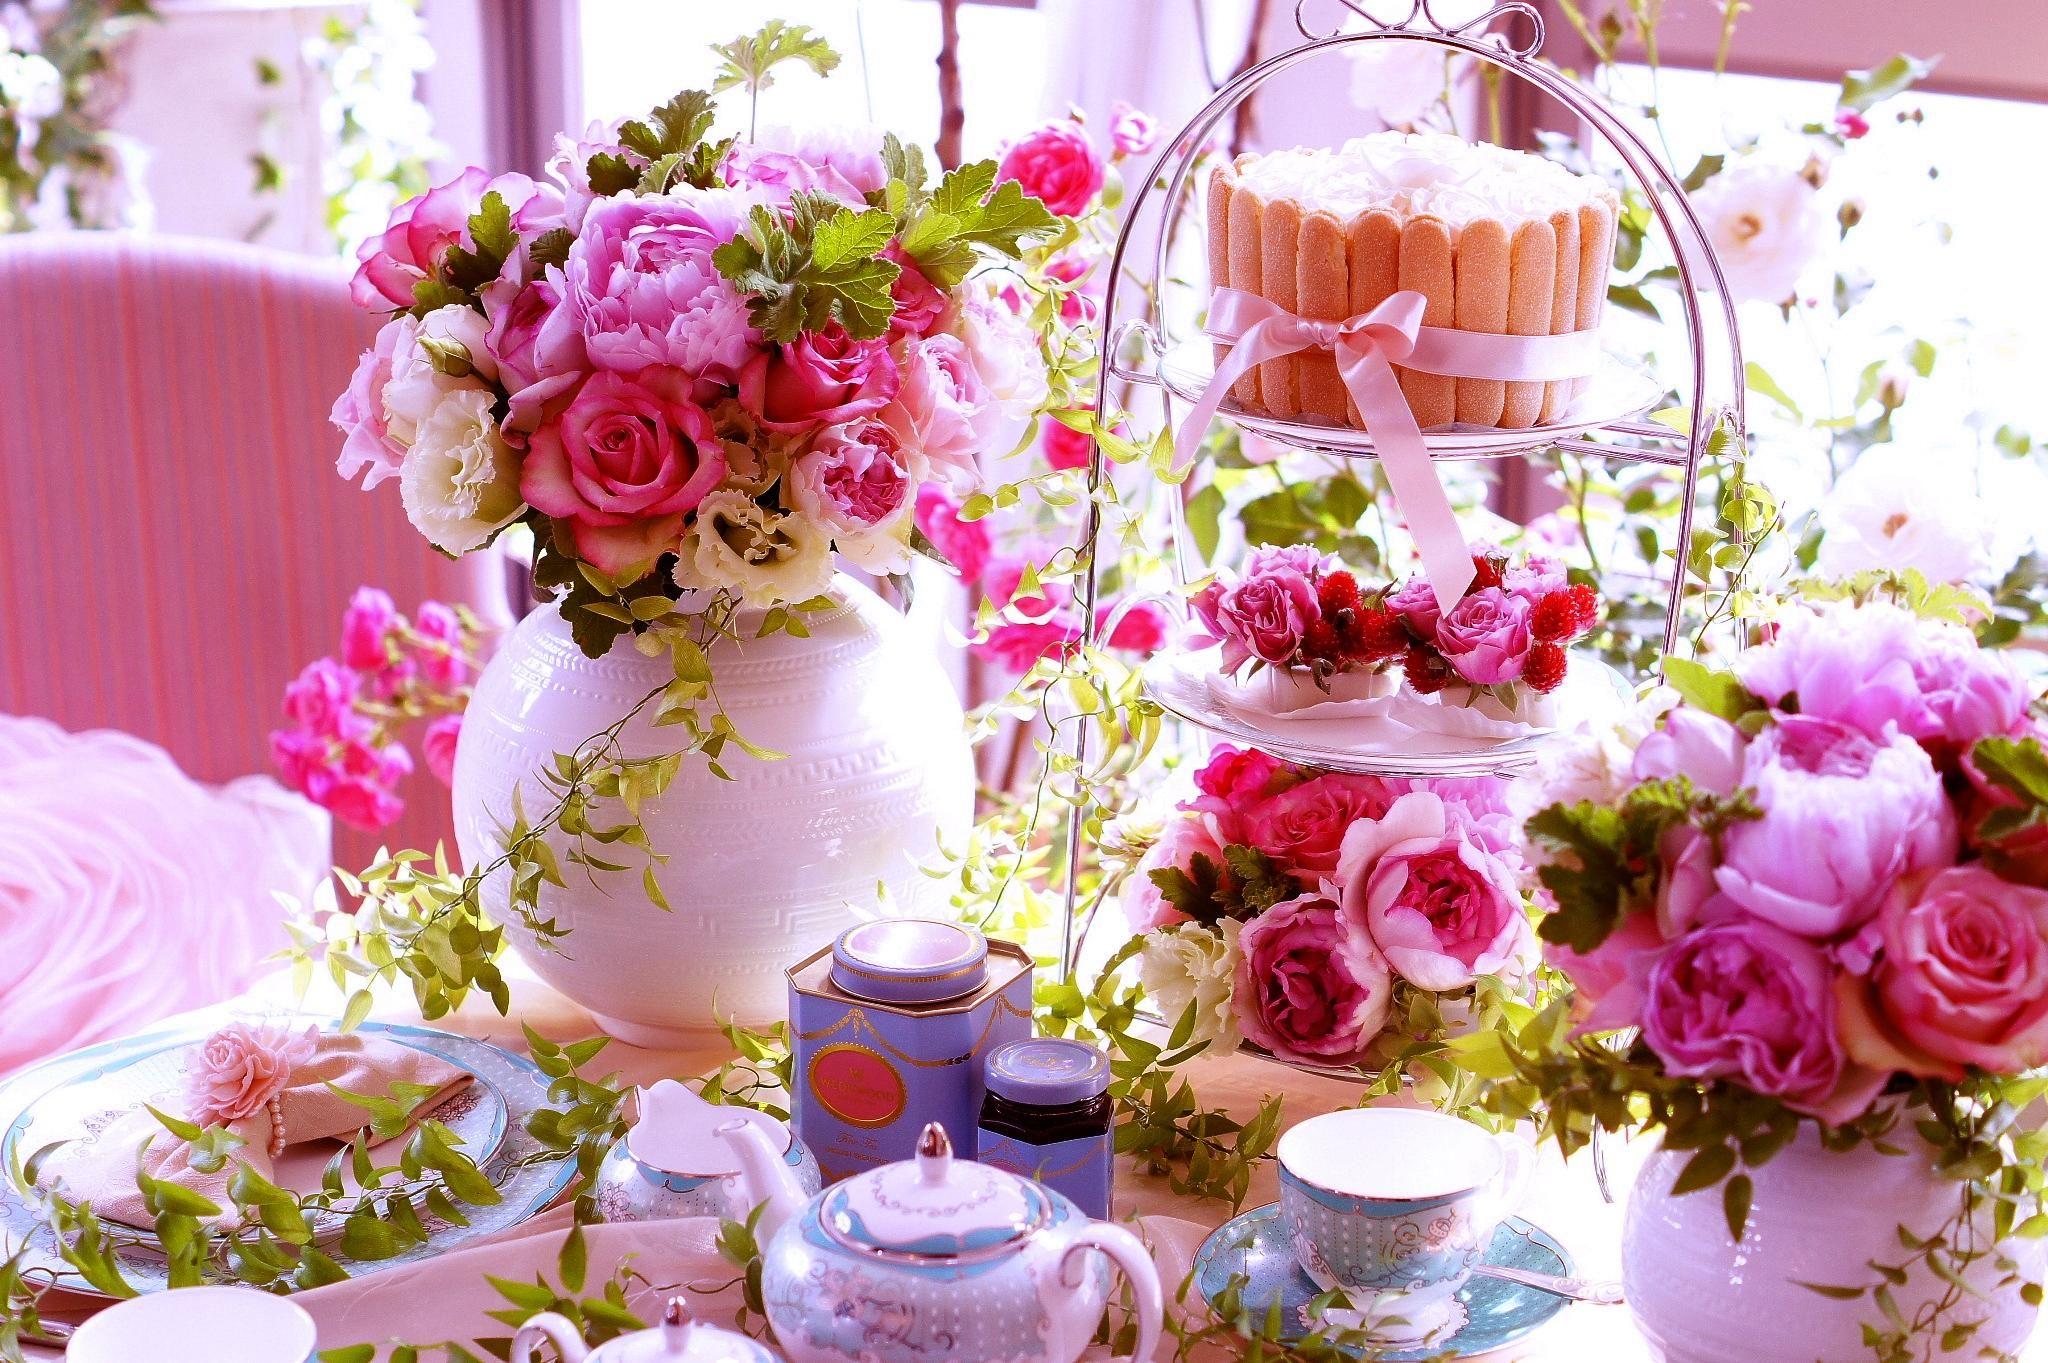 Flowers At Pink Tea Party Wallpaper (2048×1363). Spring Tea, Tea Wallpaper, Pink Tea Party